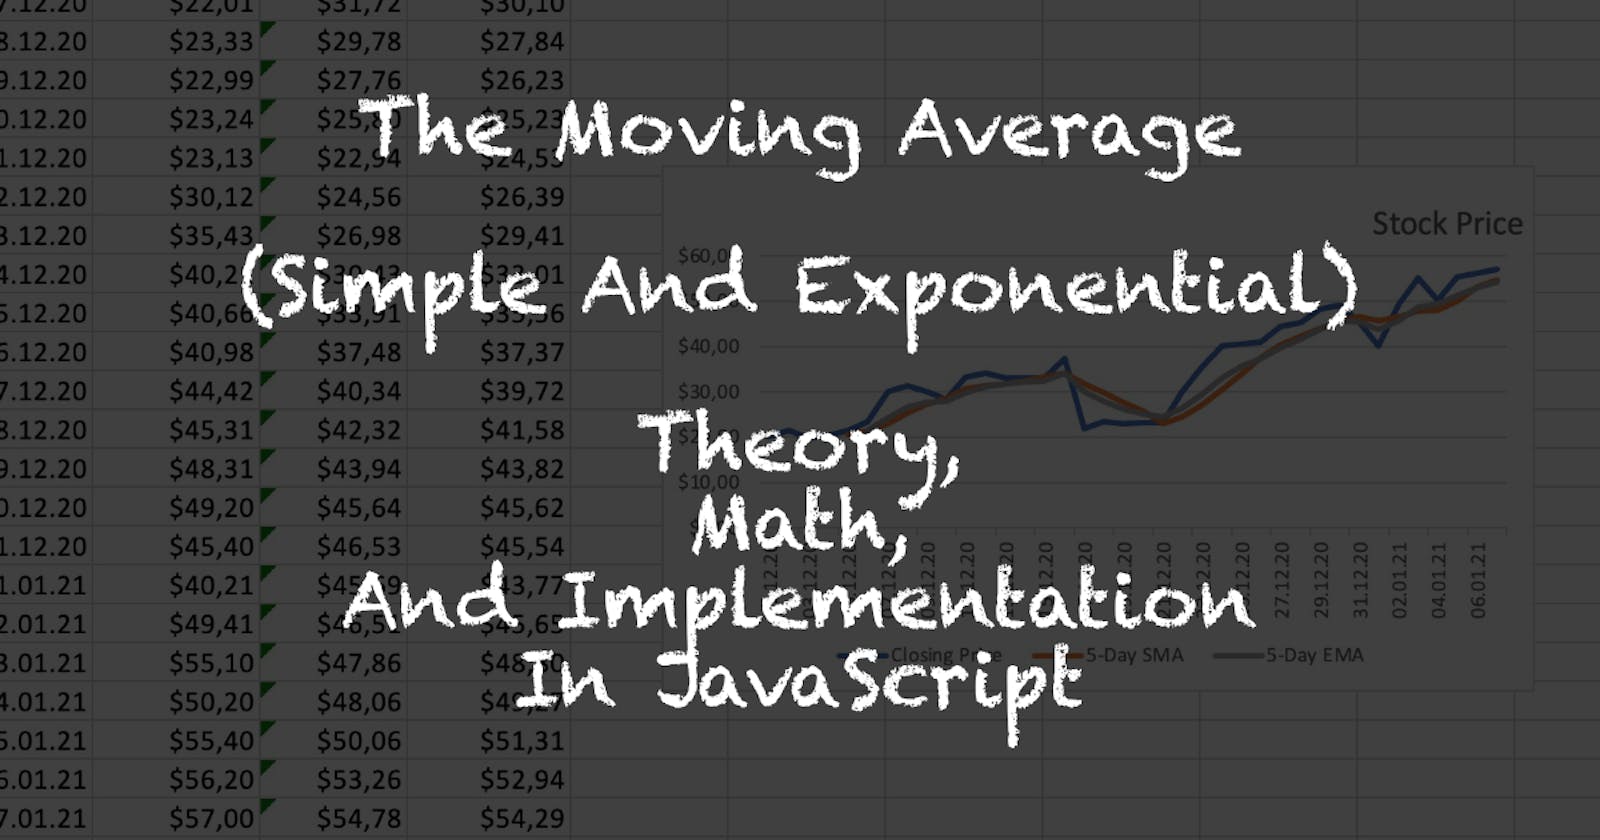 The Moving Average (Simple And Exponential) - Theory, Math, And Implementation In JavaScript